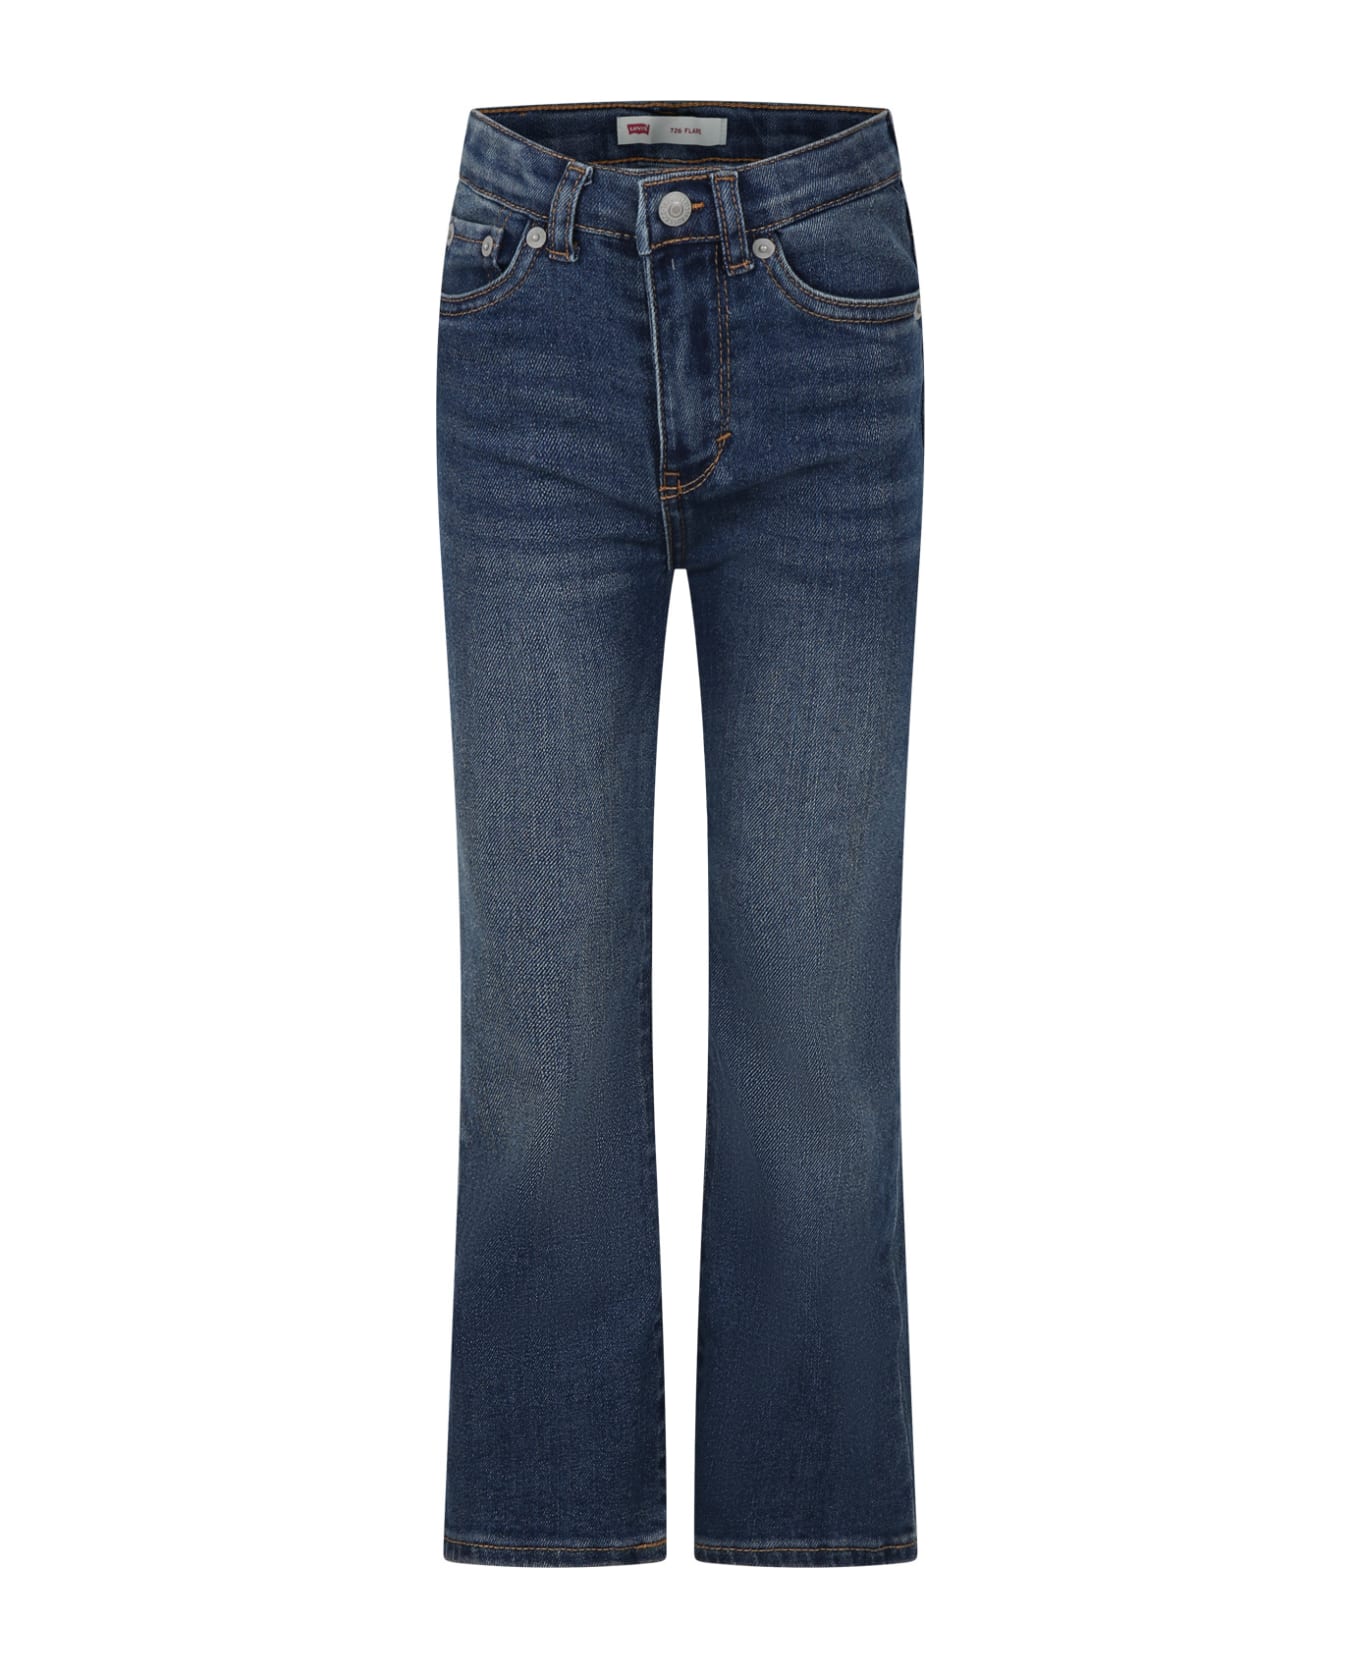 Levi's Denim Jeans For Girl With Logo Patch - Denim